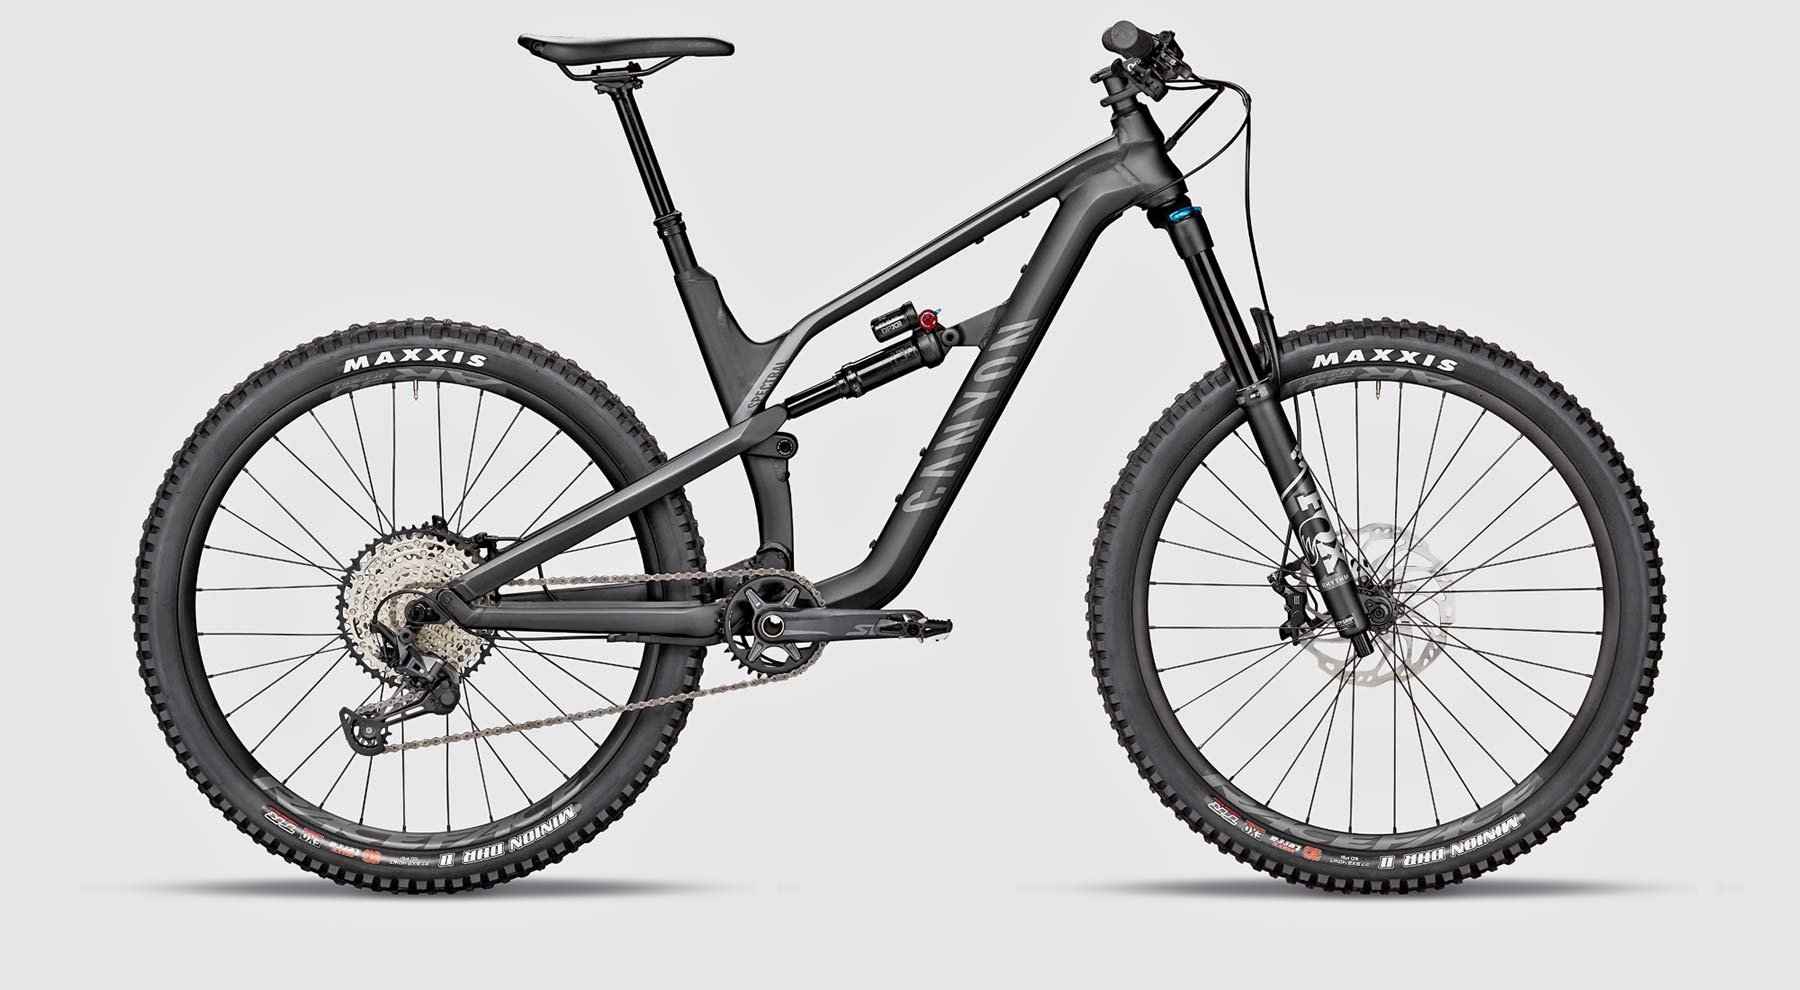 2021 Canyon Spectral trail bike, 27.5" 150mm all-mountain bike in carbon or alloy, 6